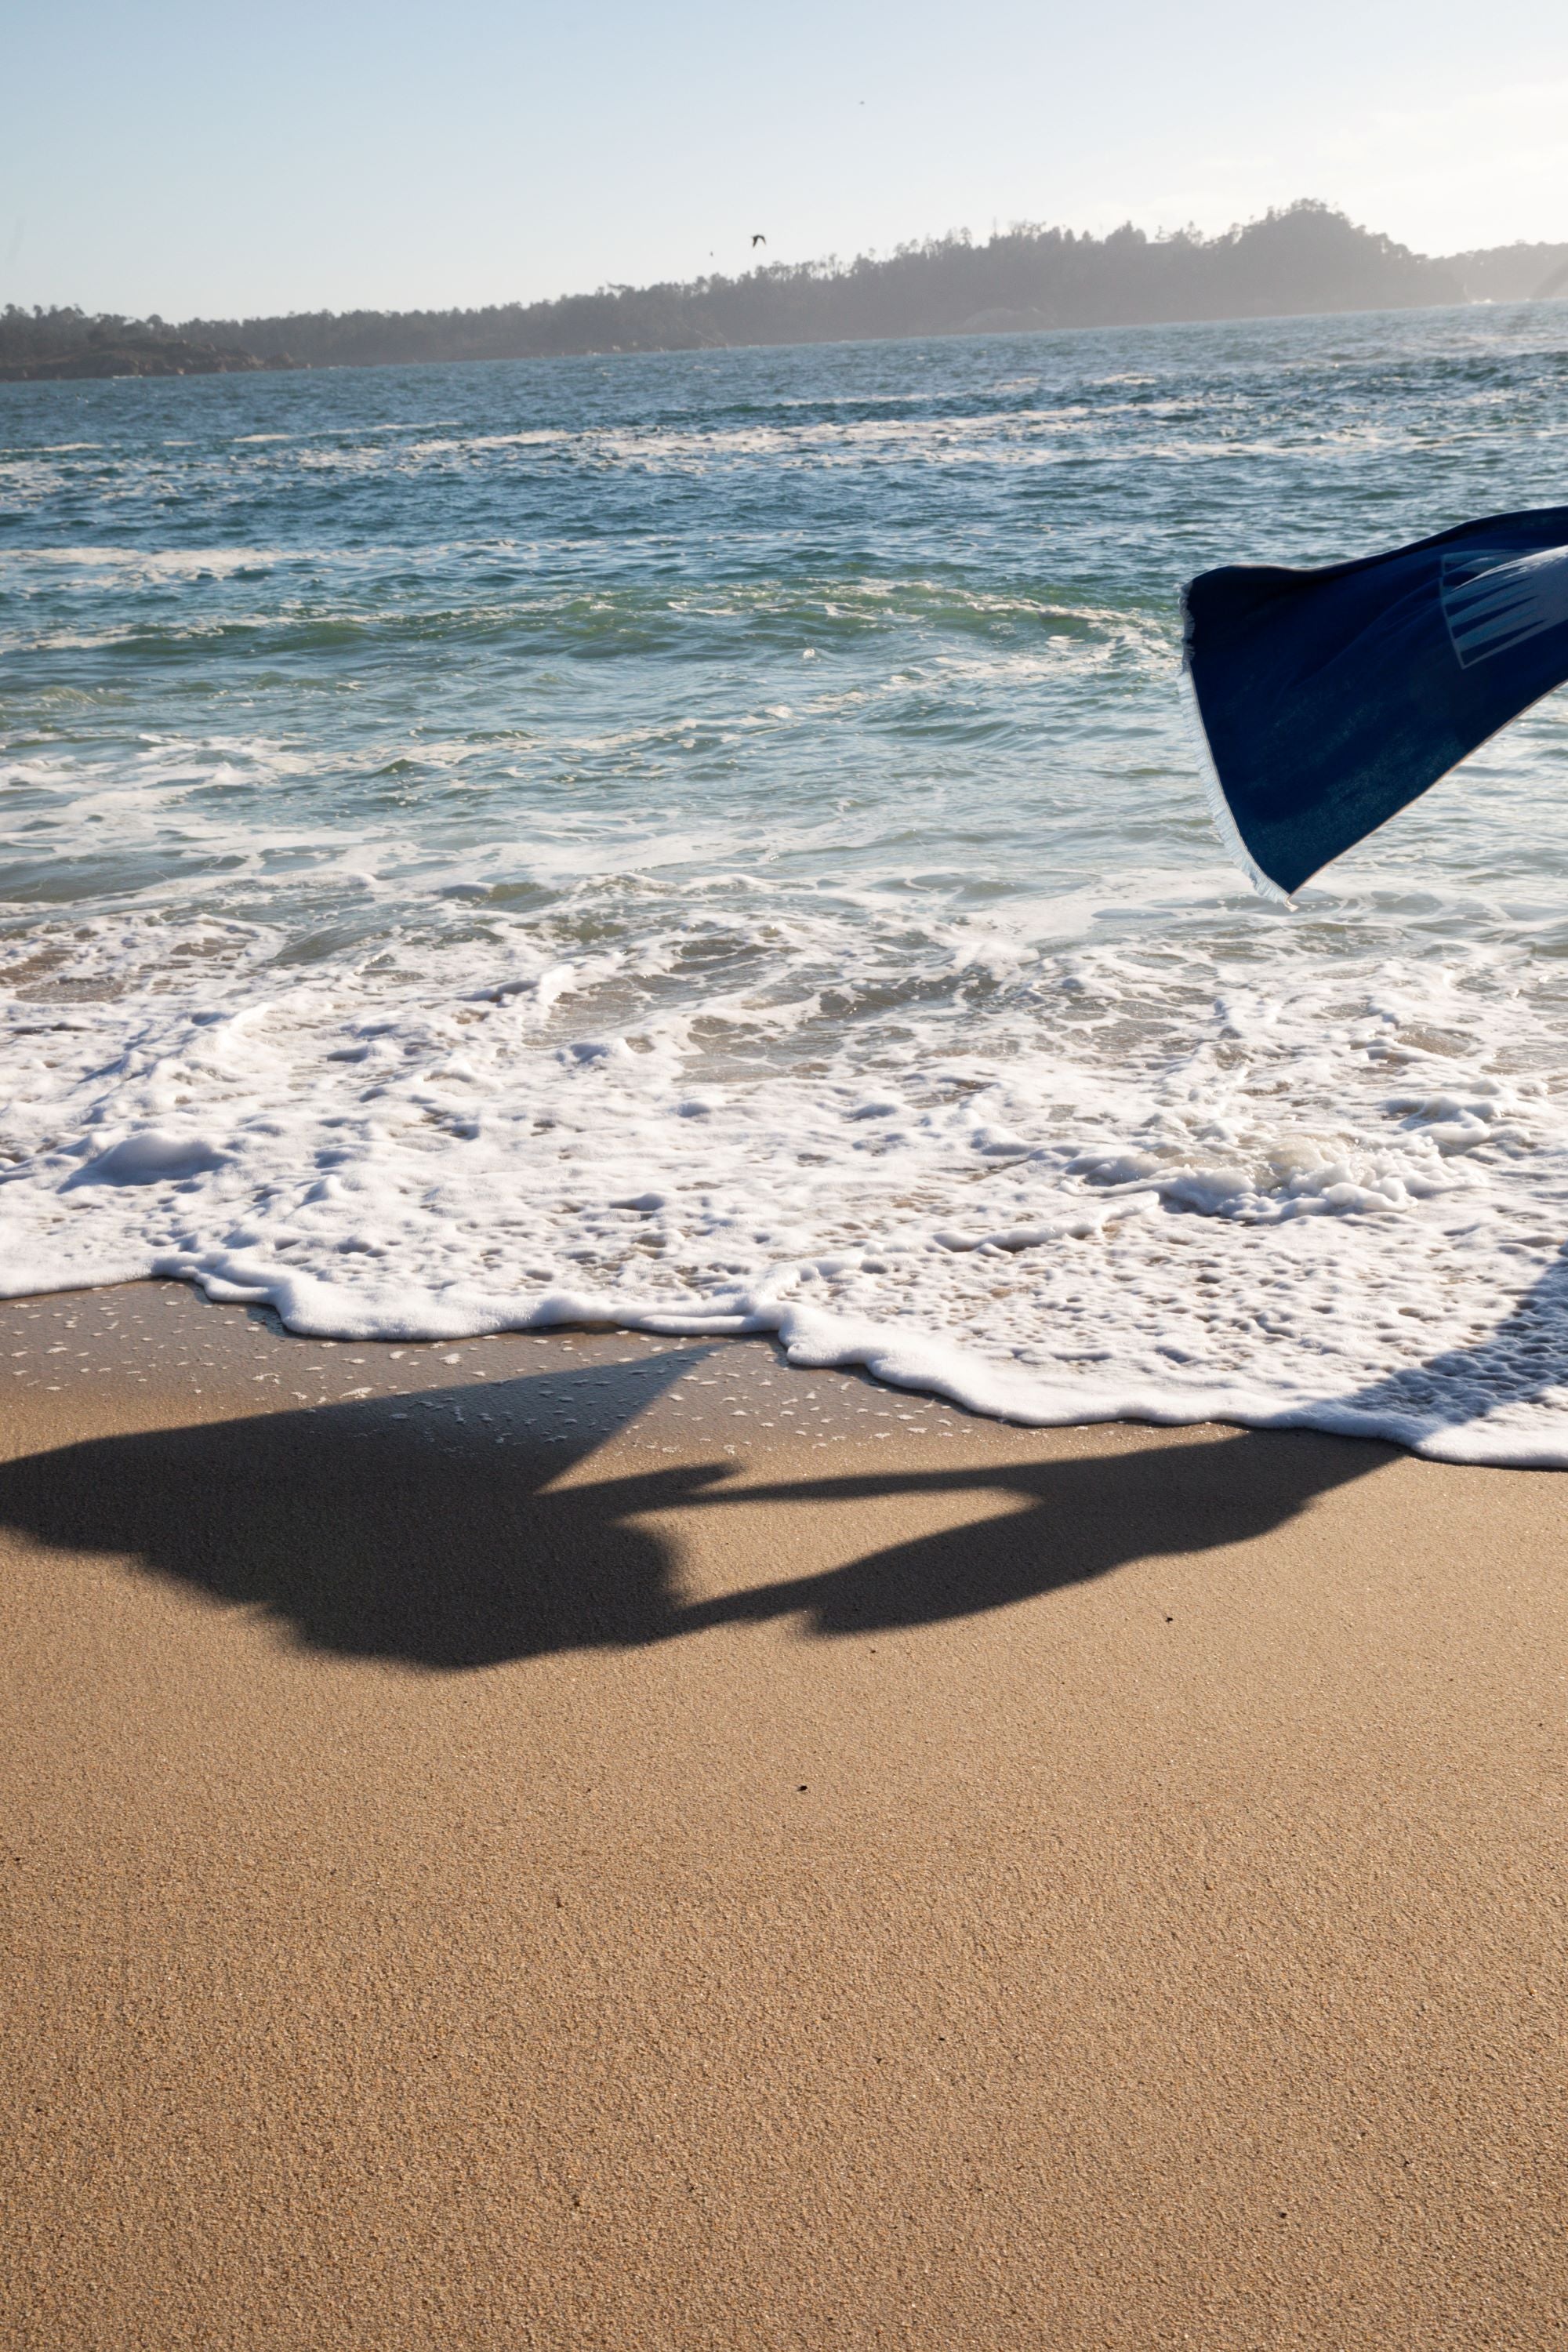 Photo of ocean with towel being suspended in the air by a gust of wind